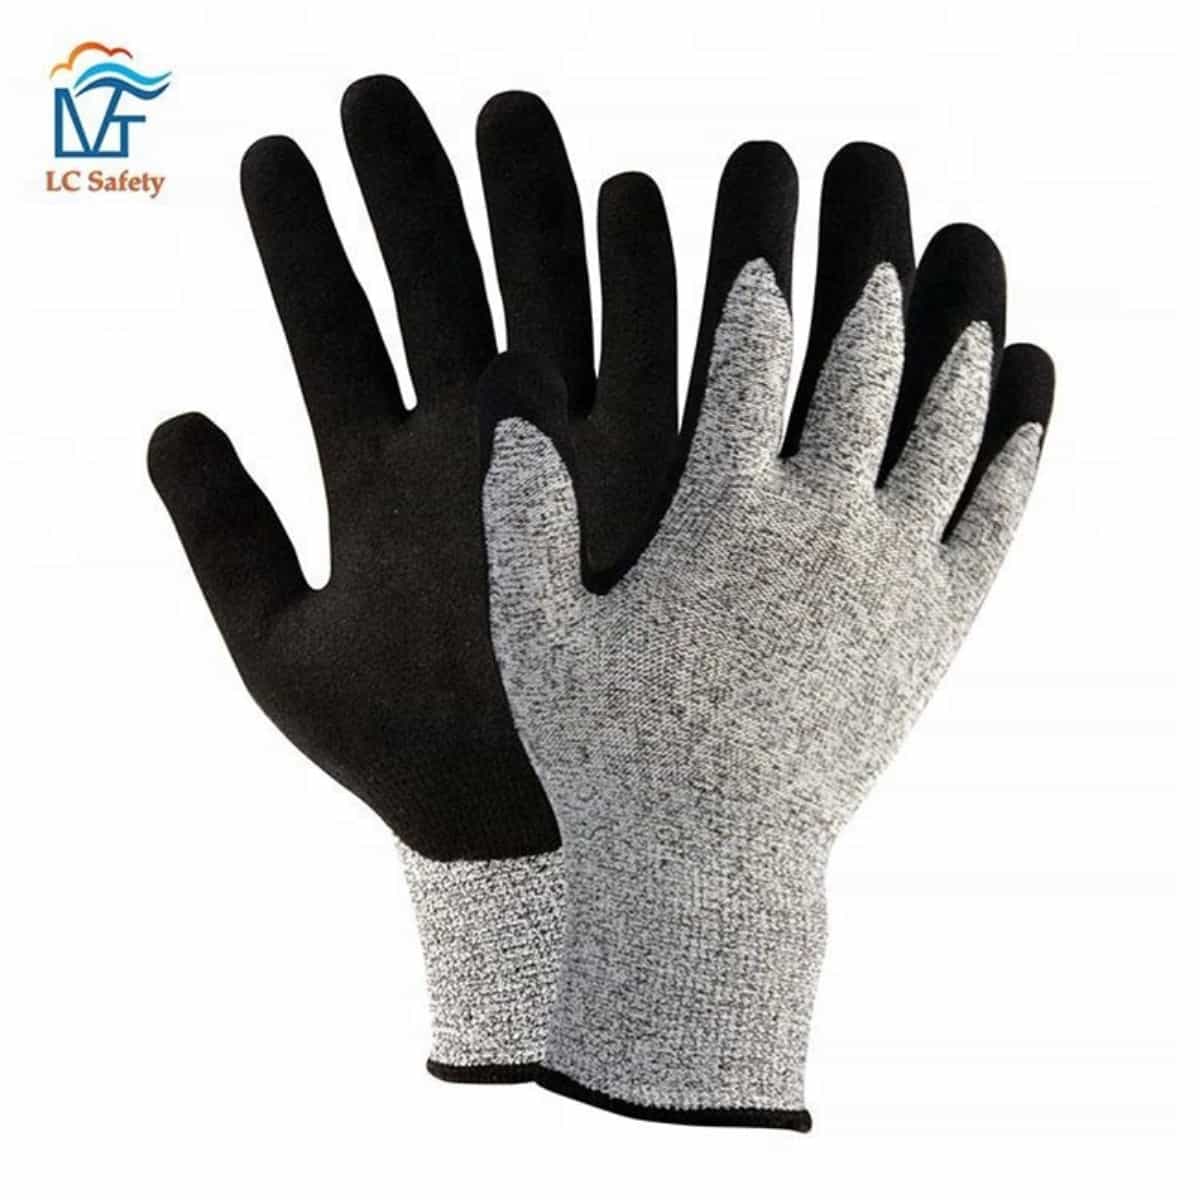 13g HPPE Industrial Cut Resistant Gloves with Sandy Nitrile Coating Palm